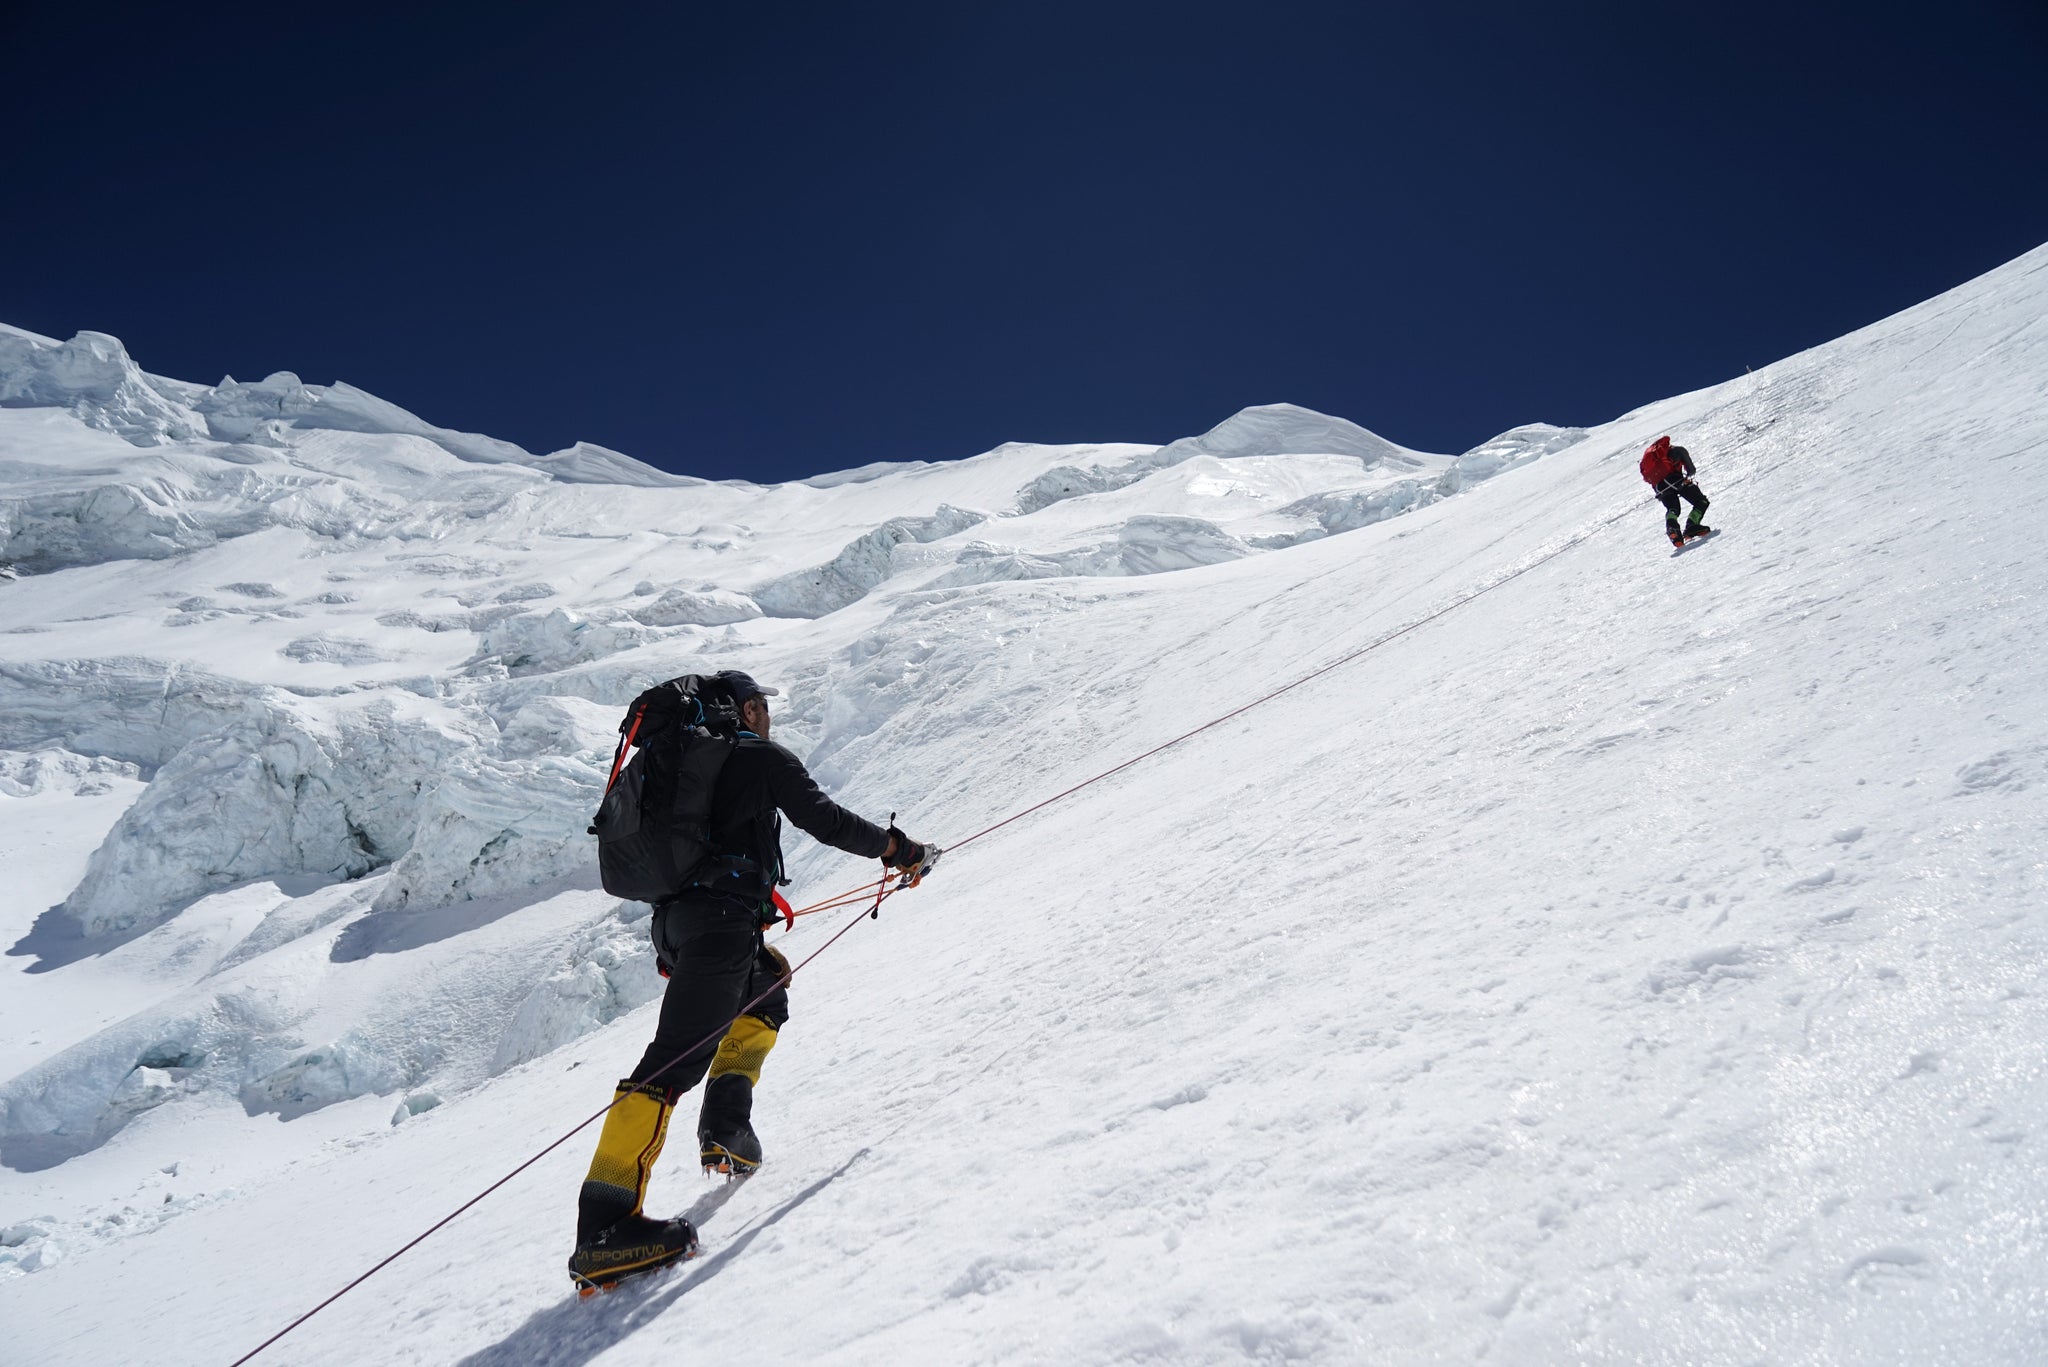 Climbers using the Rest Step technique on the approach to Camp 1 on the North Side of Mount Everest.  Photo: Zeb Blais / Blackbird Mountain Guides